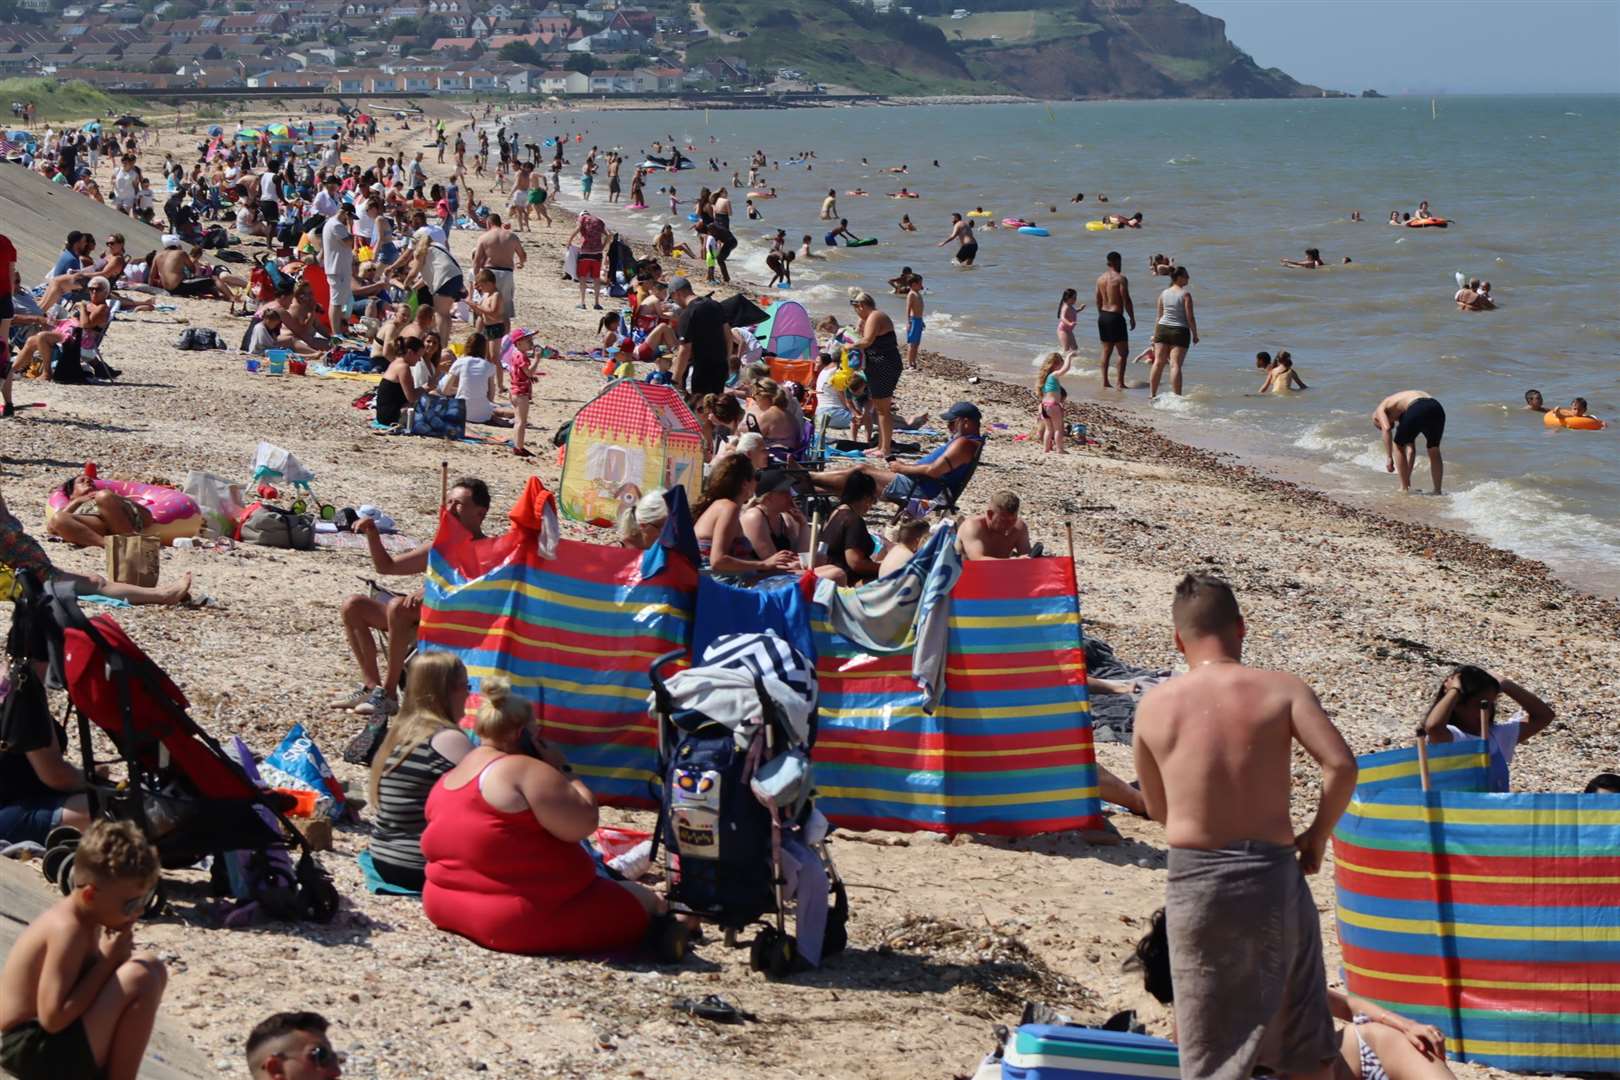 Day-trippers flocking to the seaside to soak up the sun at Leysdown on the Isle of Sheppey over the weekend